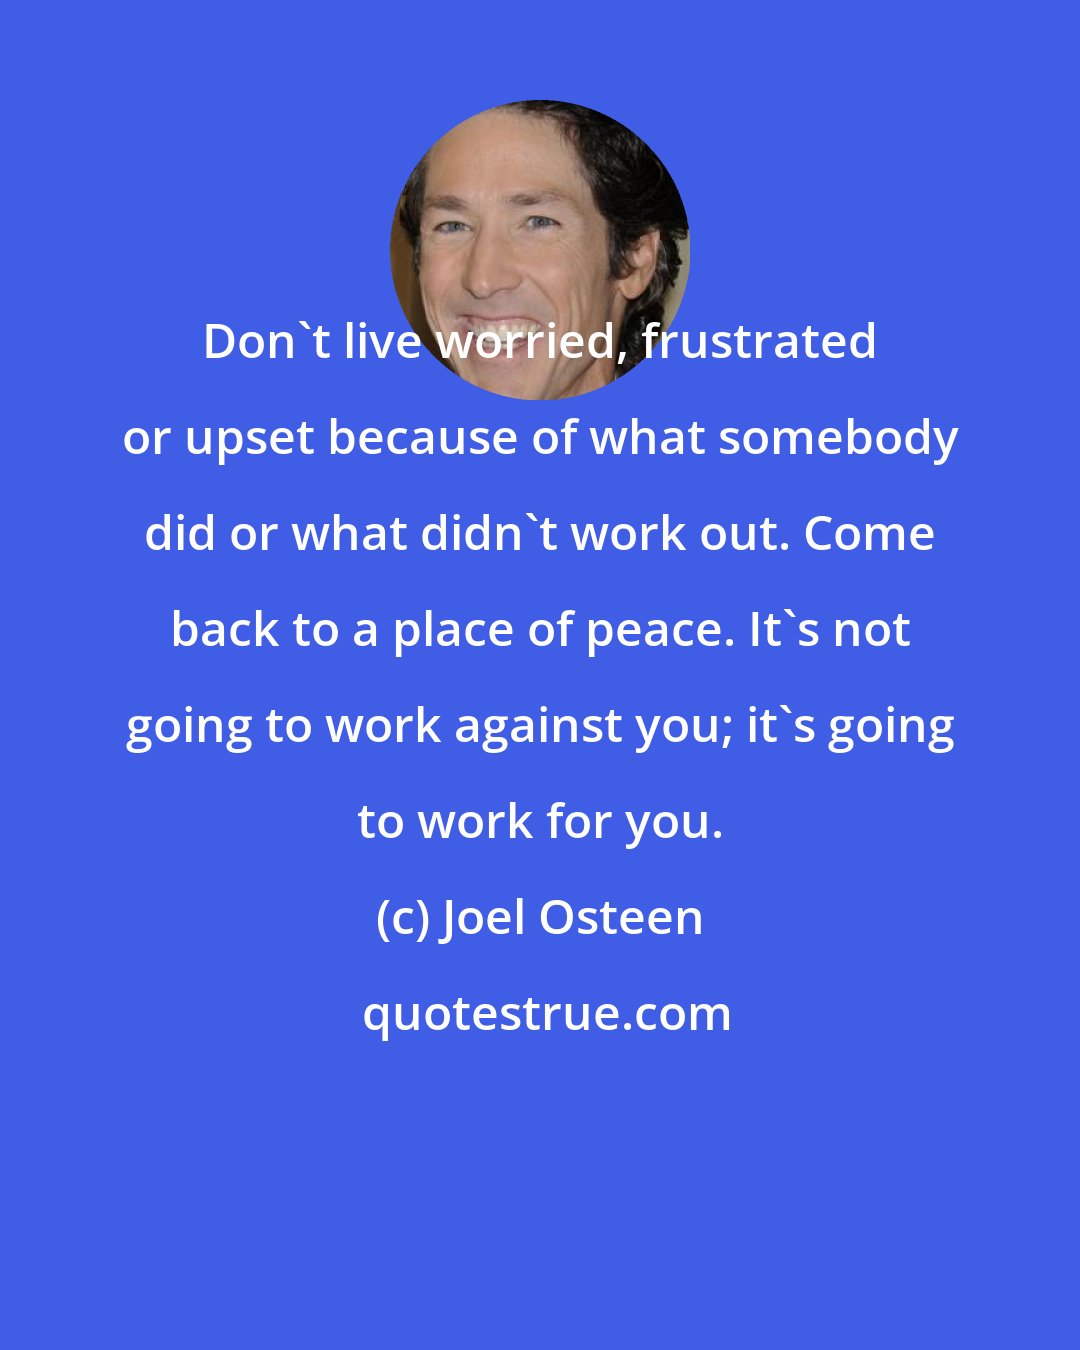 Joel Osteen: Don't live worried, frustrated or upset because of what somebody did or what didn't work out. Come back to a place of peace. It's not going to work against you; it's going to work for you.